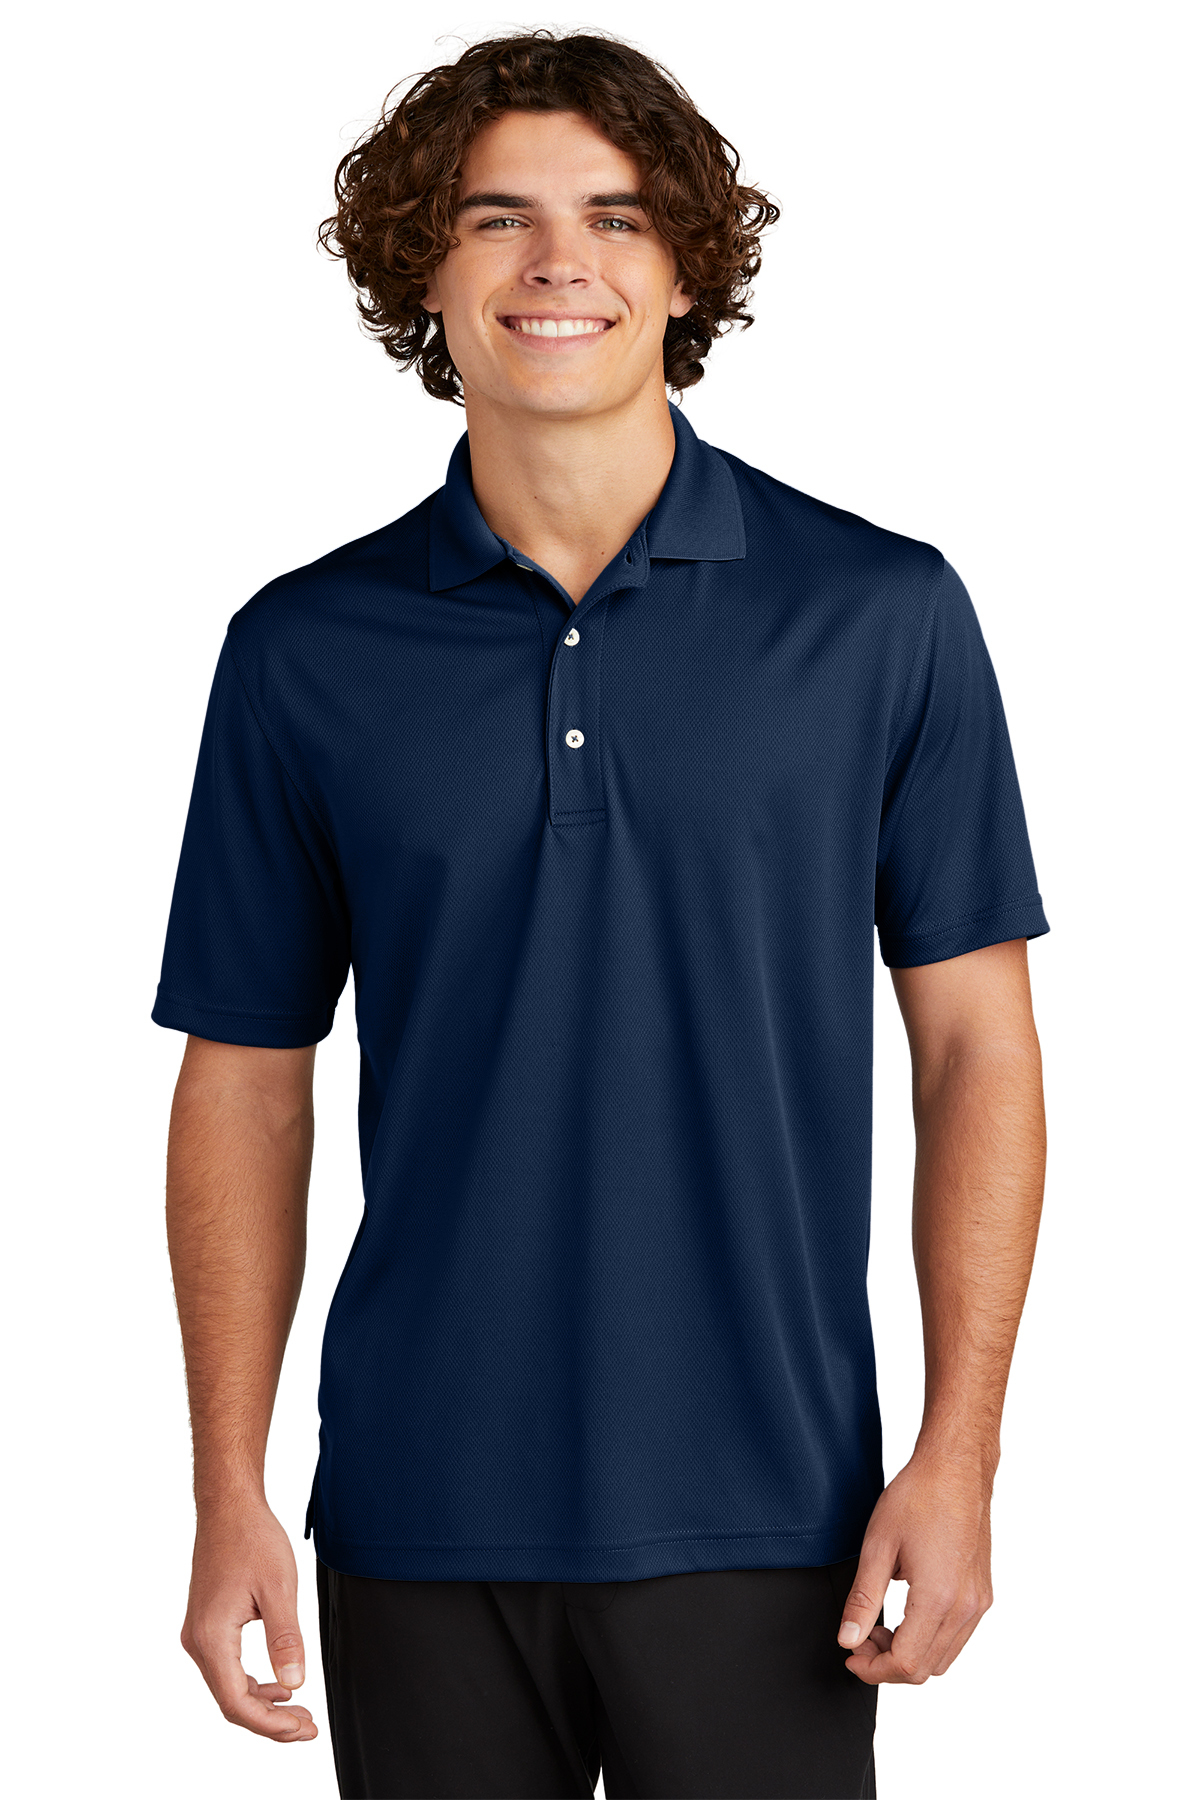 Sport-Tek Dri-Mesh Polo with Tipped Collar and Piping Style K467 - Casual  Clothing for Men, Women, Youth, and Children